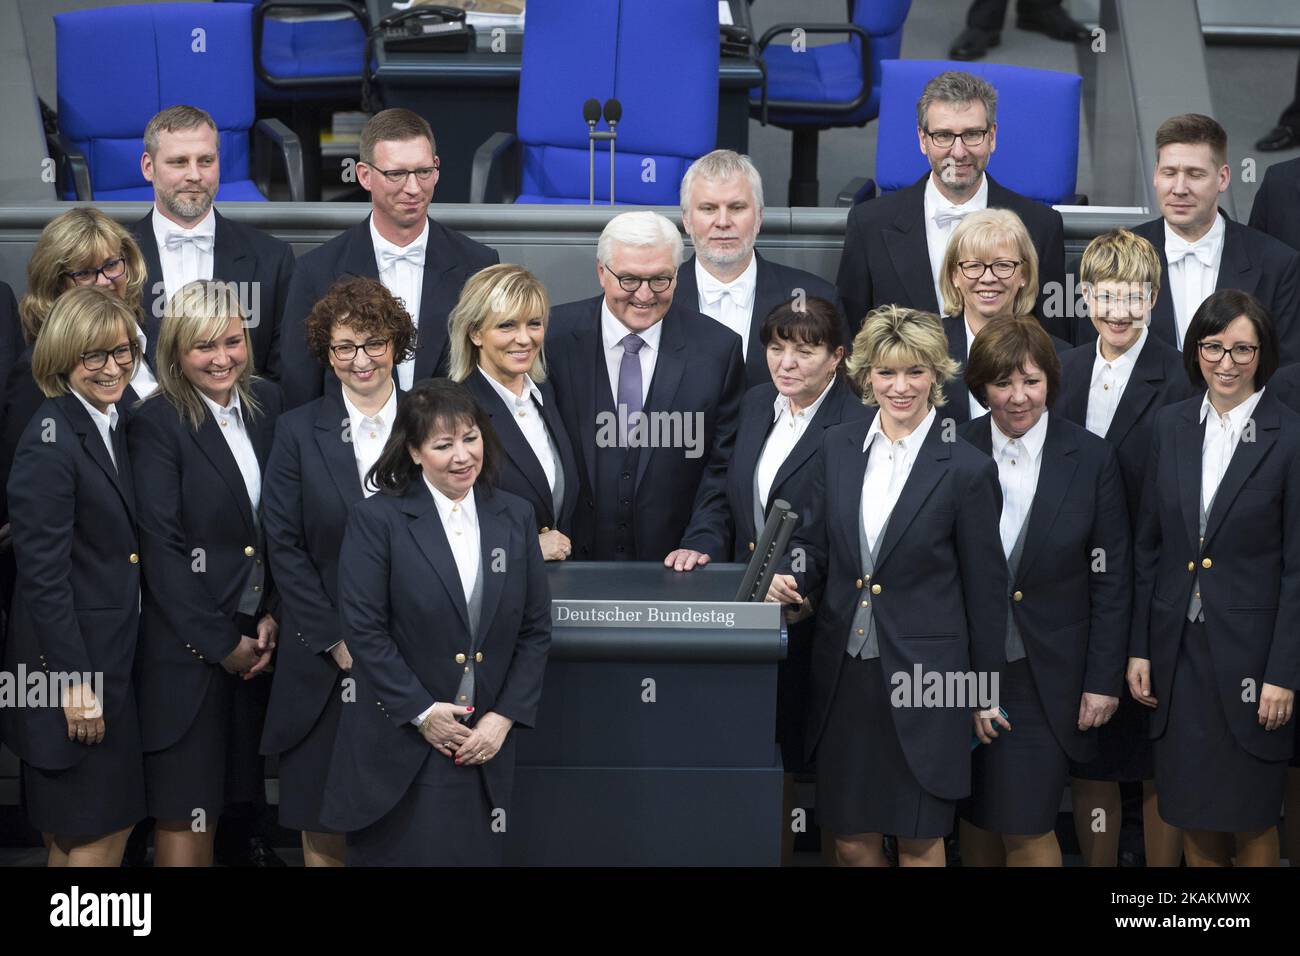 New elected German President Frank-Walter Steinmeier (C) poses for a picture with Bundestag employees after his election by the Bundesversammlung (Federal Assembly) at the Reichstag in Berlin, Germany on February 12, 2017. Steinmeier, 61, obtained 931 votes out of 1,260 being the official candidate of the government parties CDU/CSU and SPD and supported from FDP and Green party, against poverty researcher Christoph Butterwegge, nominated by the left party Die Linke and Albrecht Glaser, nominated by the far right party AfD (Alternative for Germany). (Photo by Emmanuele Contini/NurPhoto) *** Ple Stock Photo